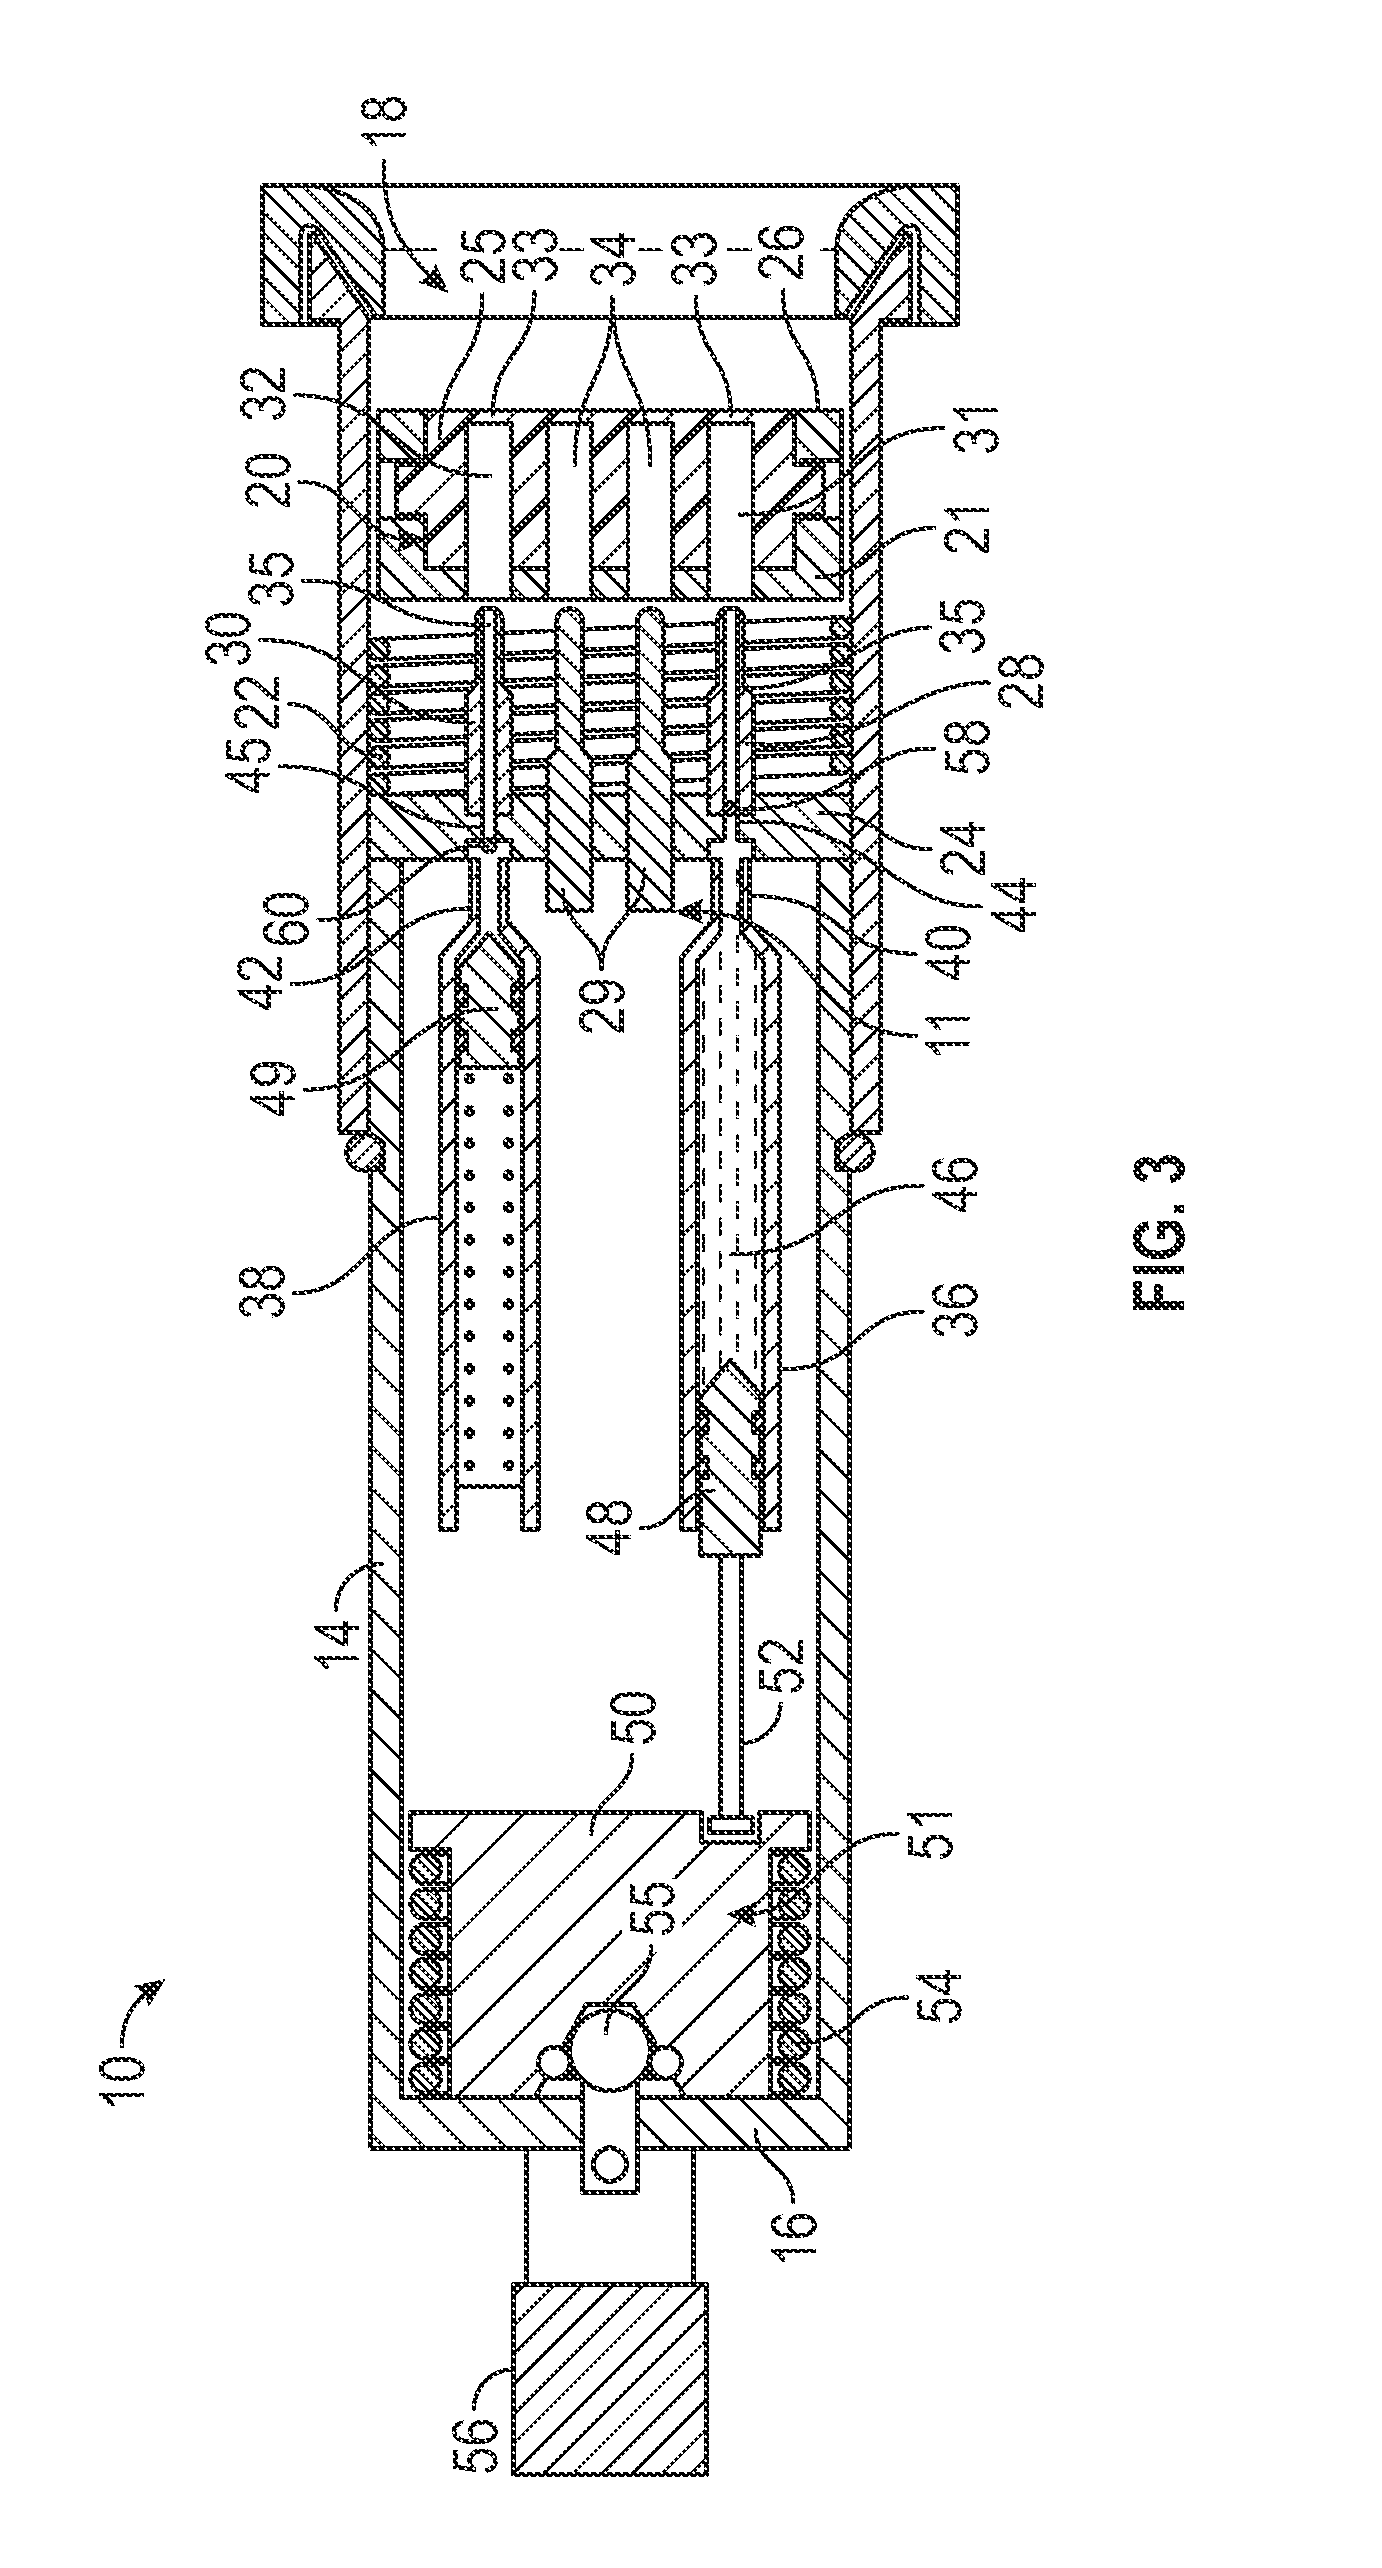 Flush and fill tool for subsea connectors